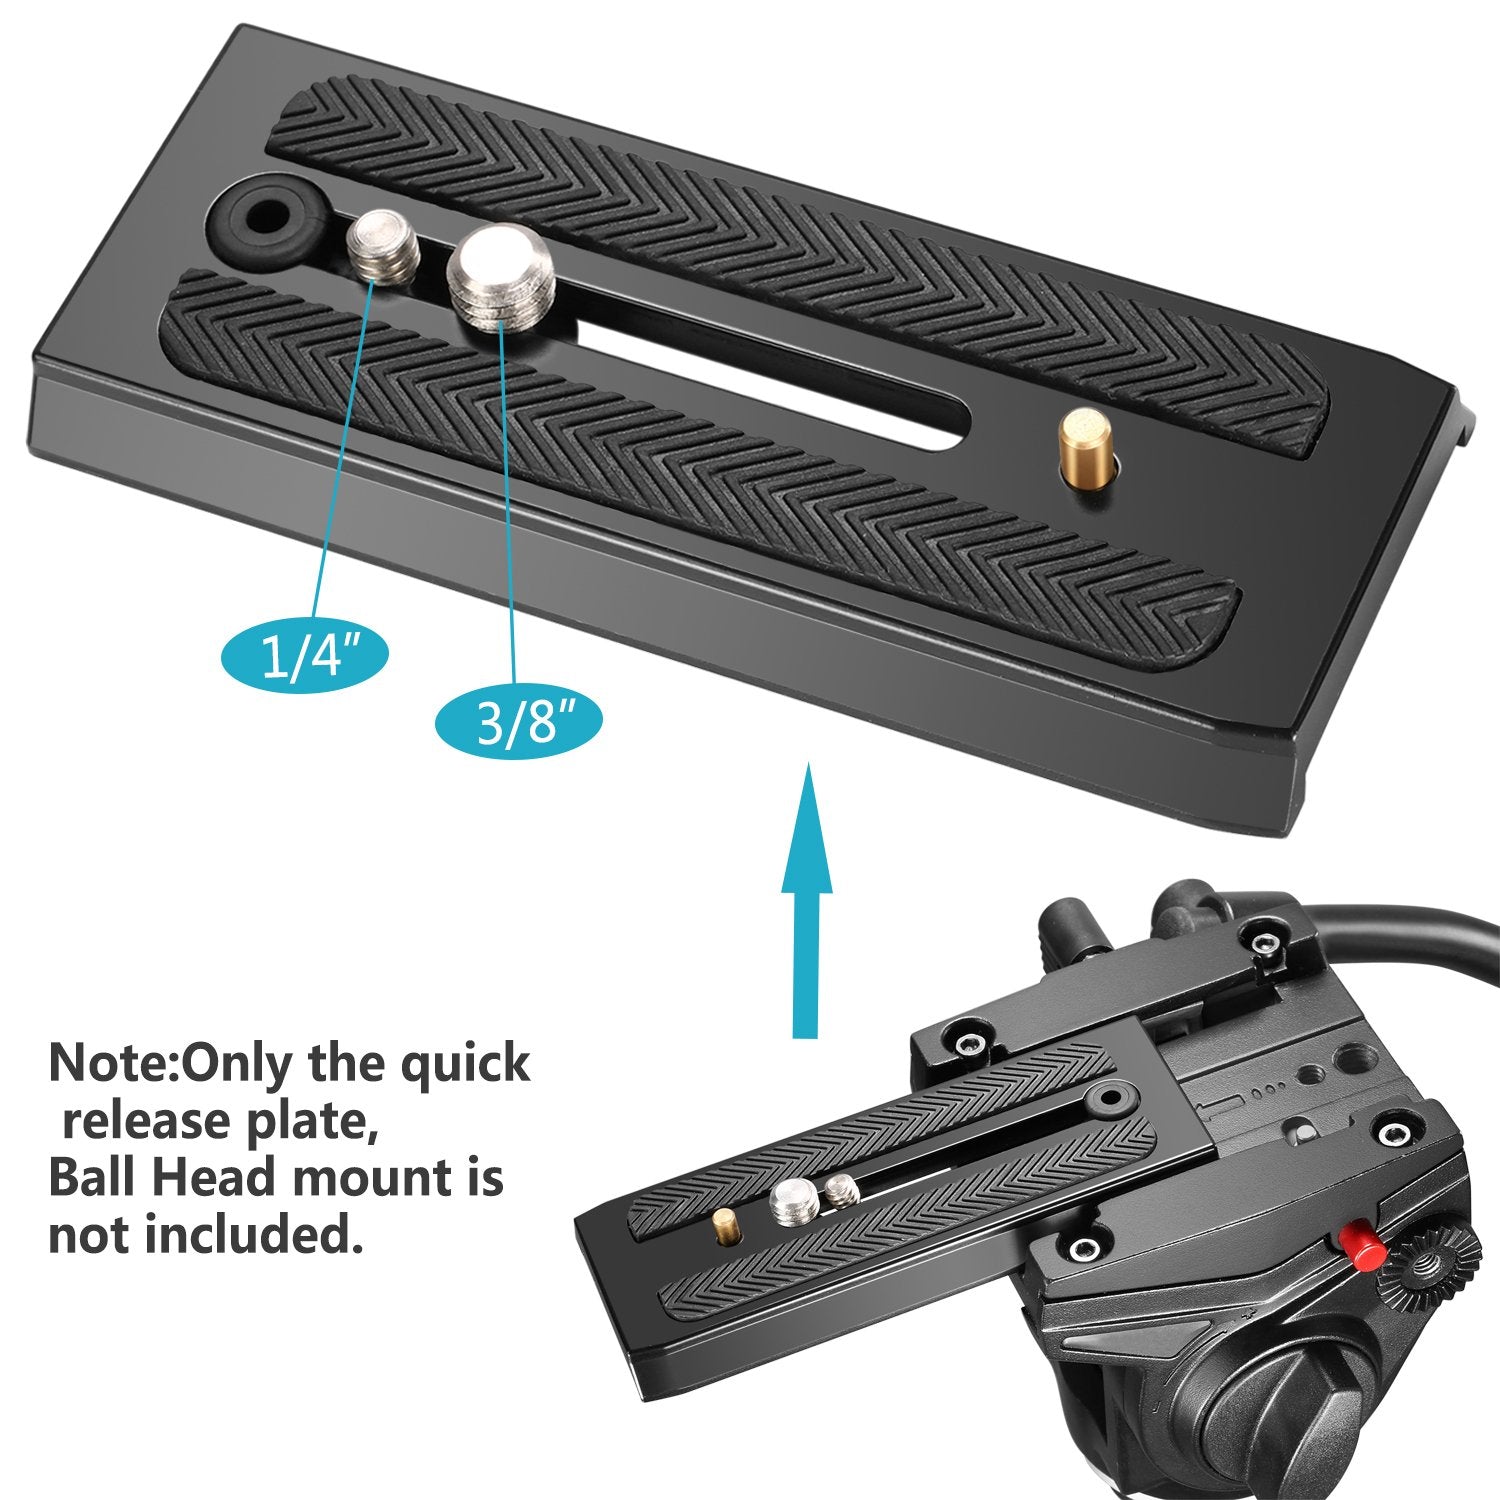 Neewer 2-Pack Rapid Connect Quick Shoe Sliding Plate Camera Mounts with 1/4 inch and 3/8 inches Mounting Screws for Manfrotto 501HDV 503HDV 701HDV MH055M0-Q5